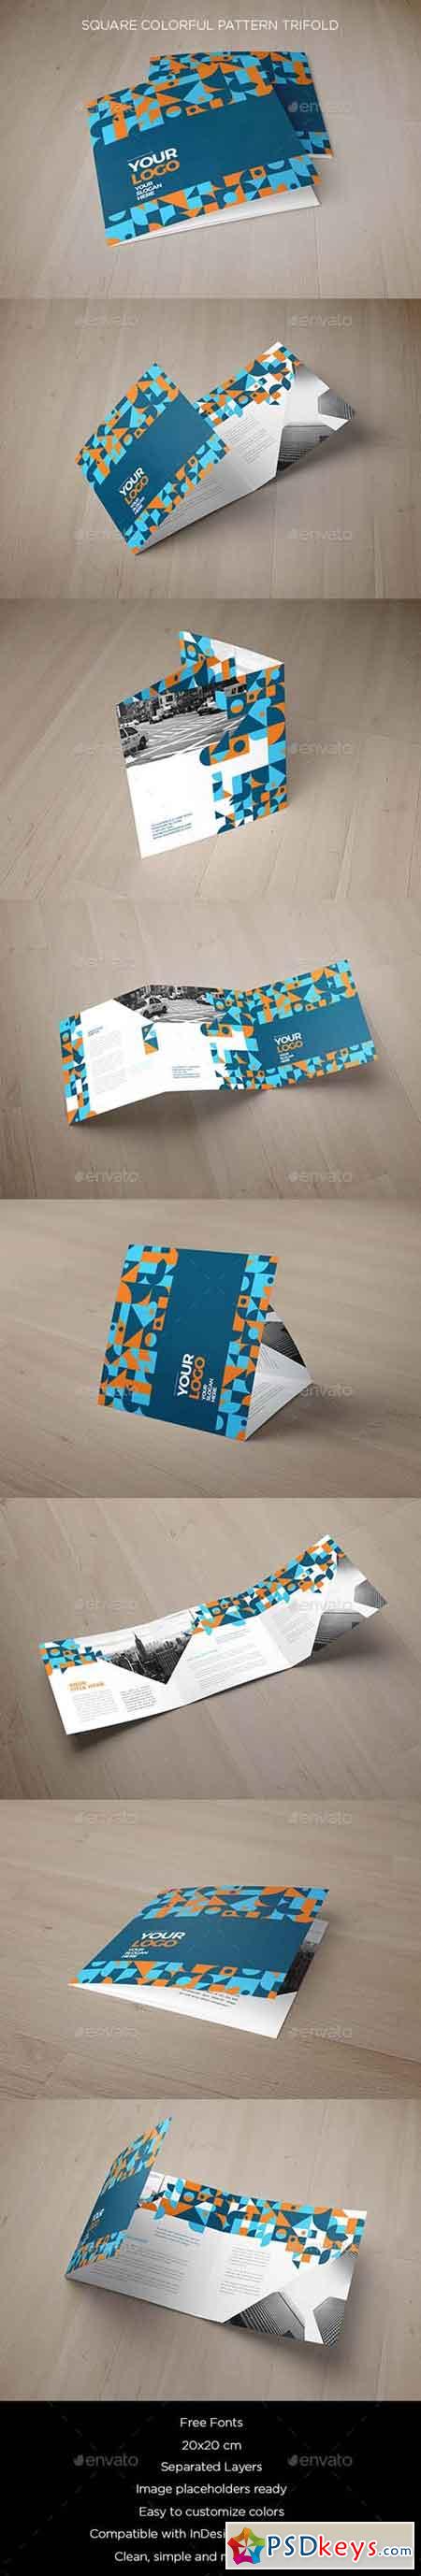 Square Colorful Pattern Trifold 19239485